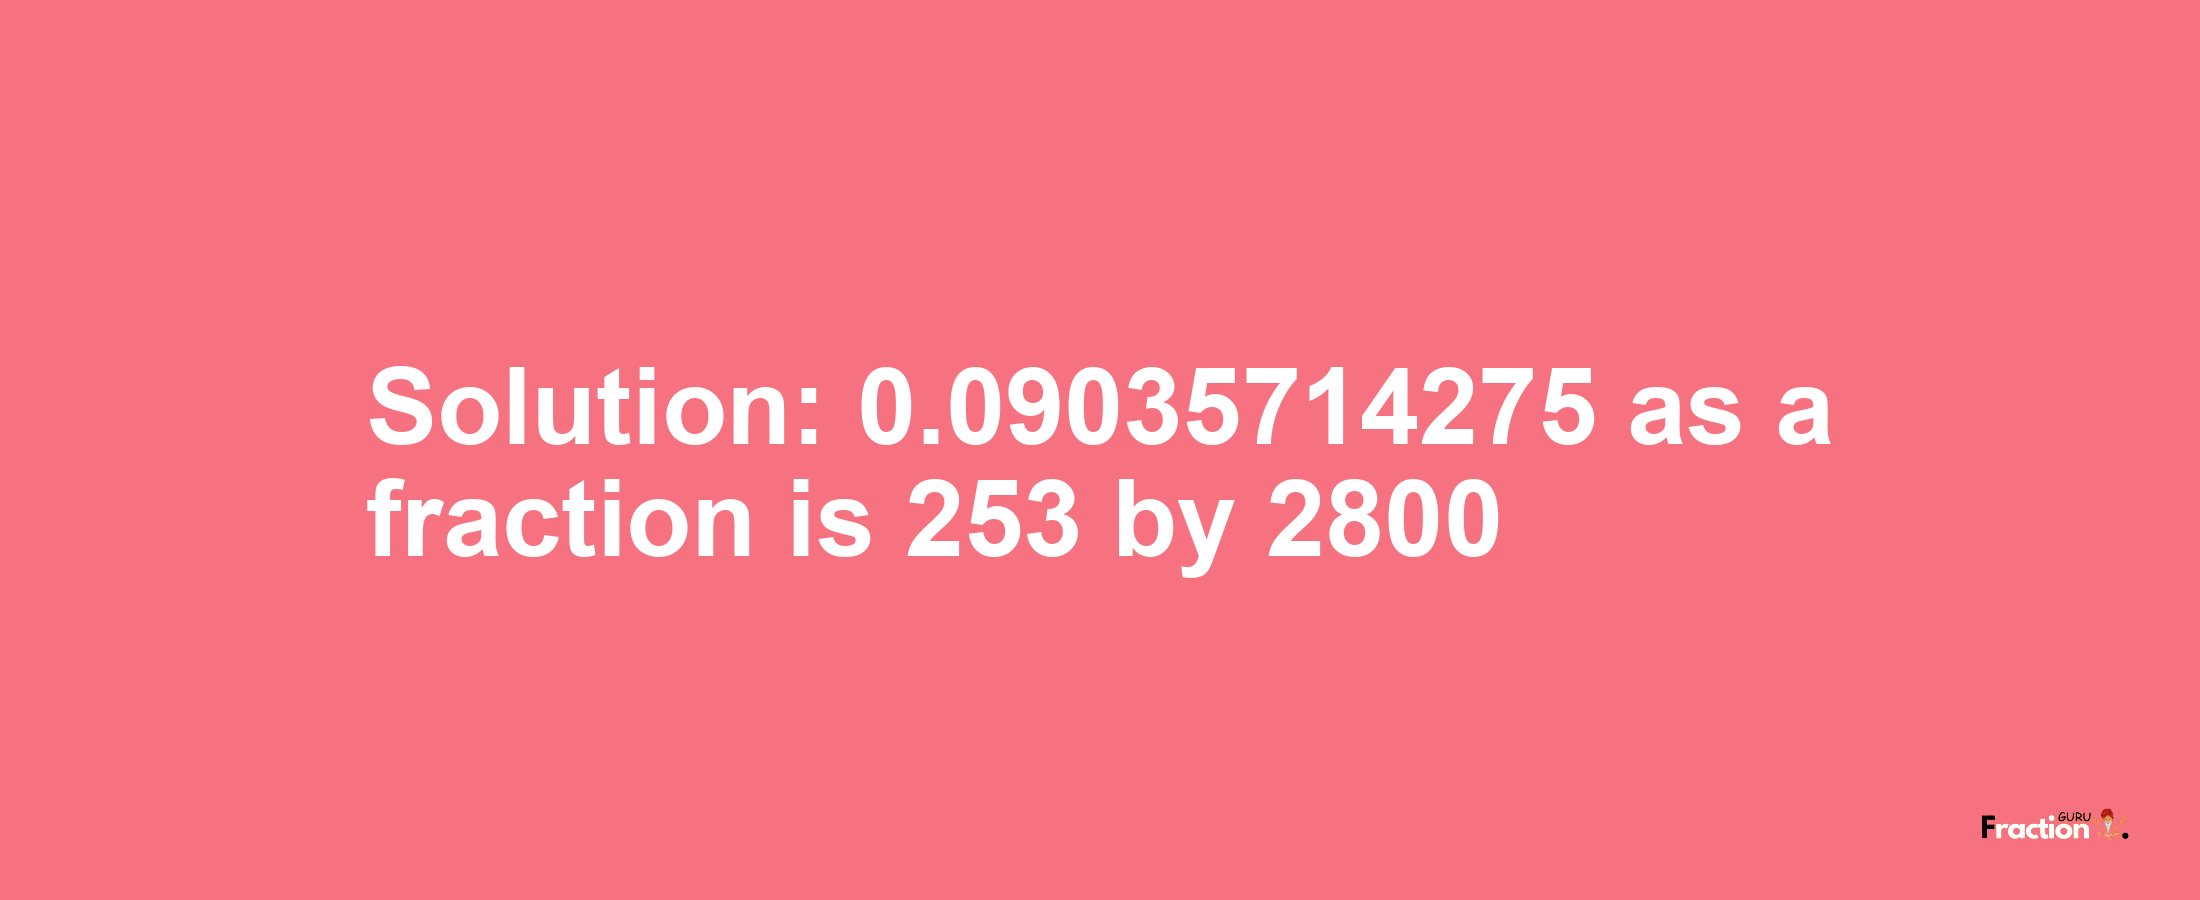 Solution:0.09035714275 as a fraction is 253/2800